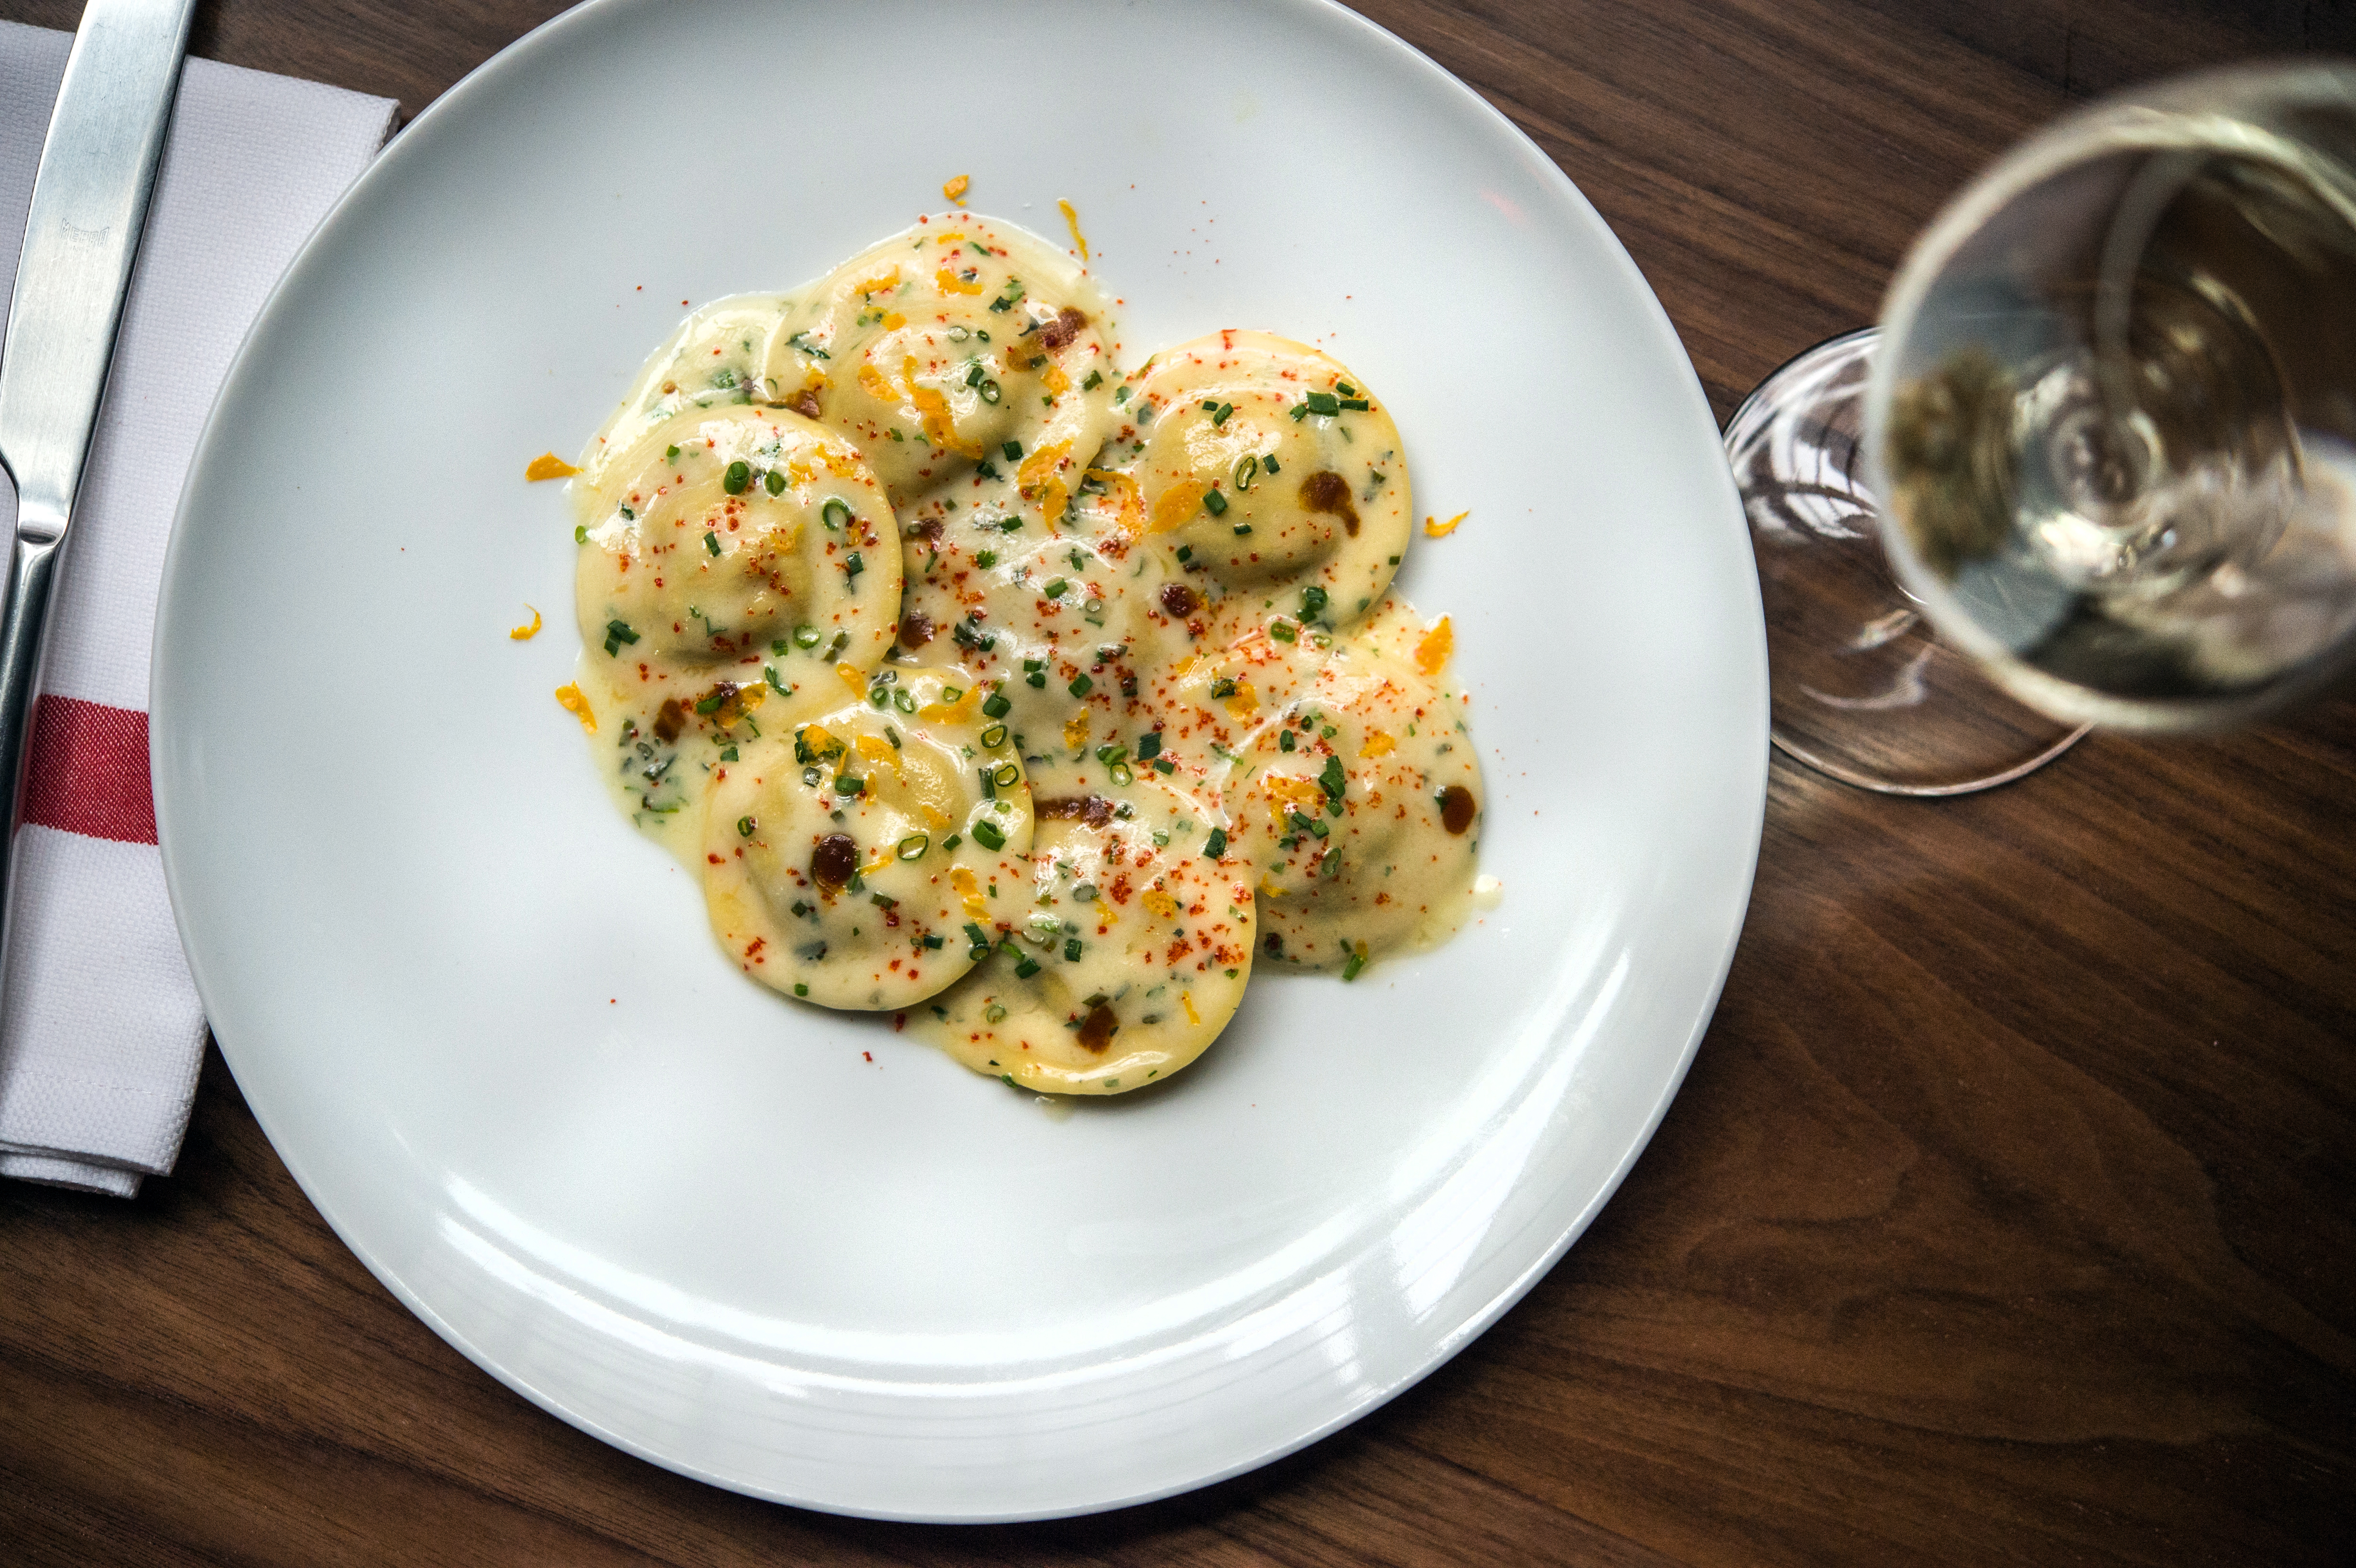 A saucy pile of lobster ravioli on a white plate with a wine glass to the right.